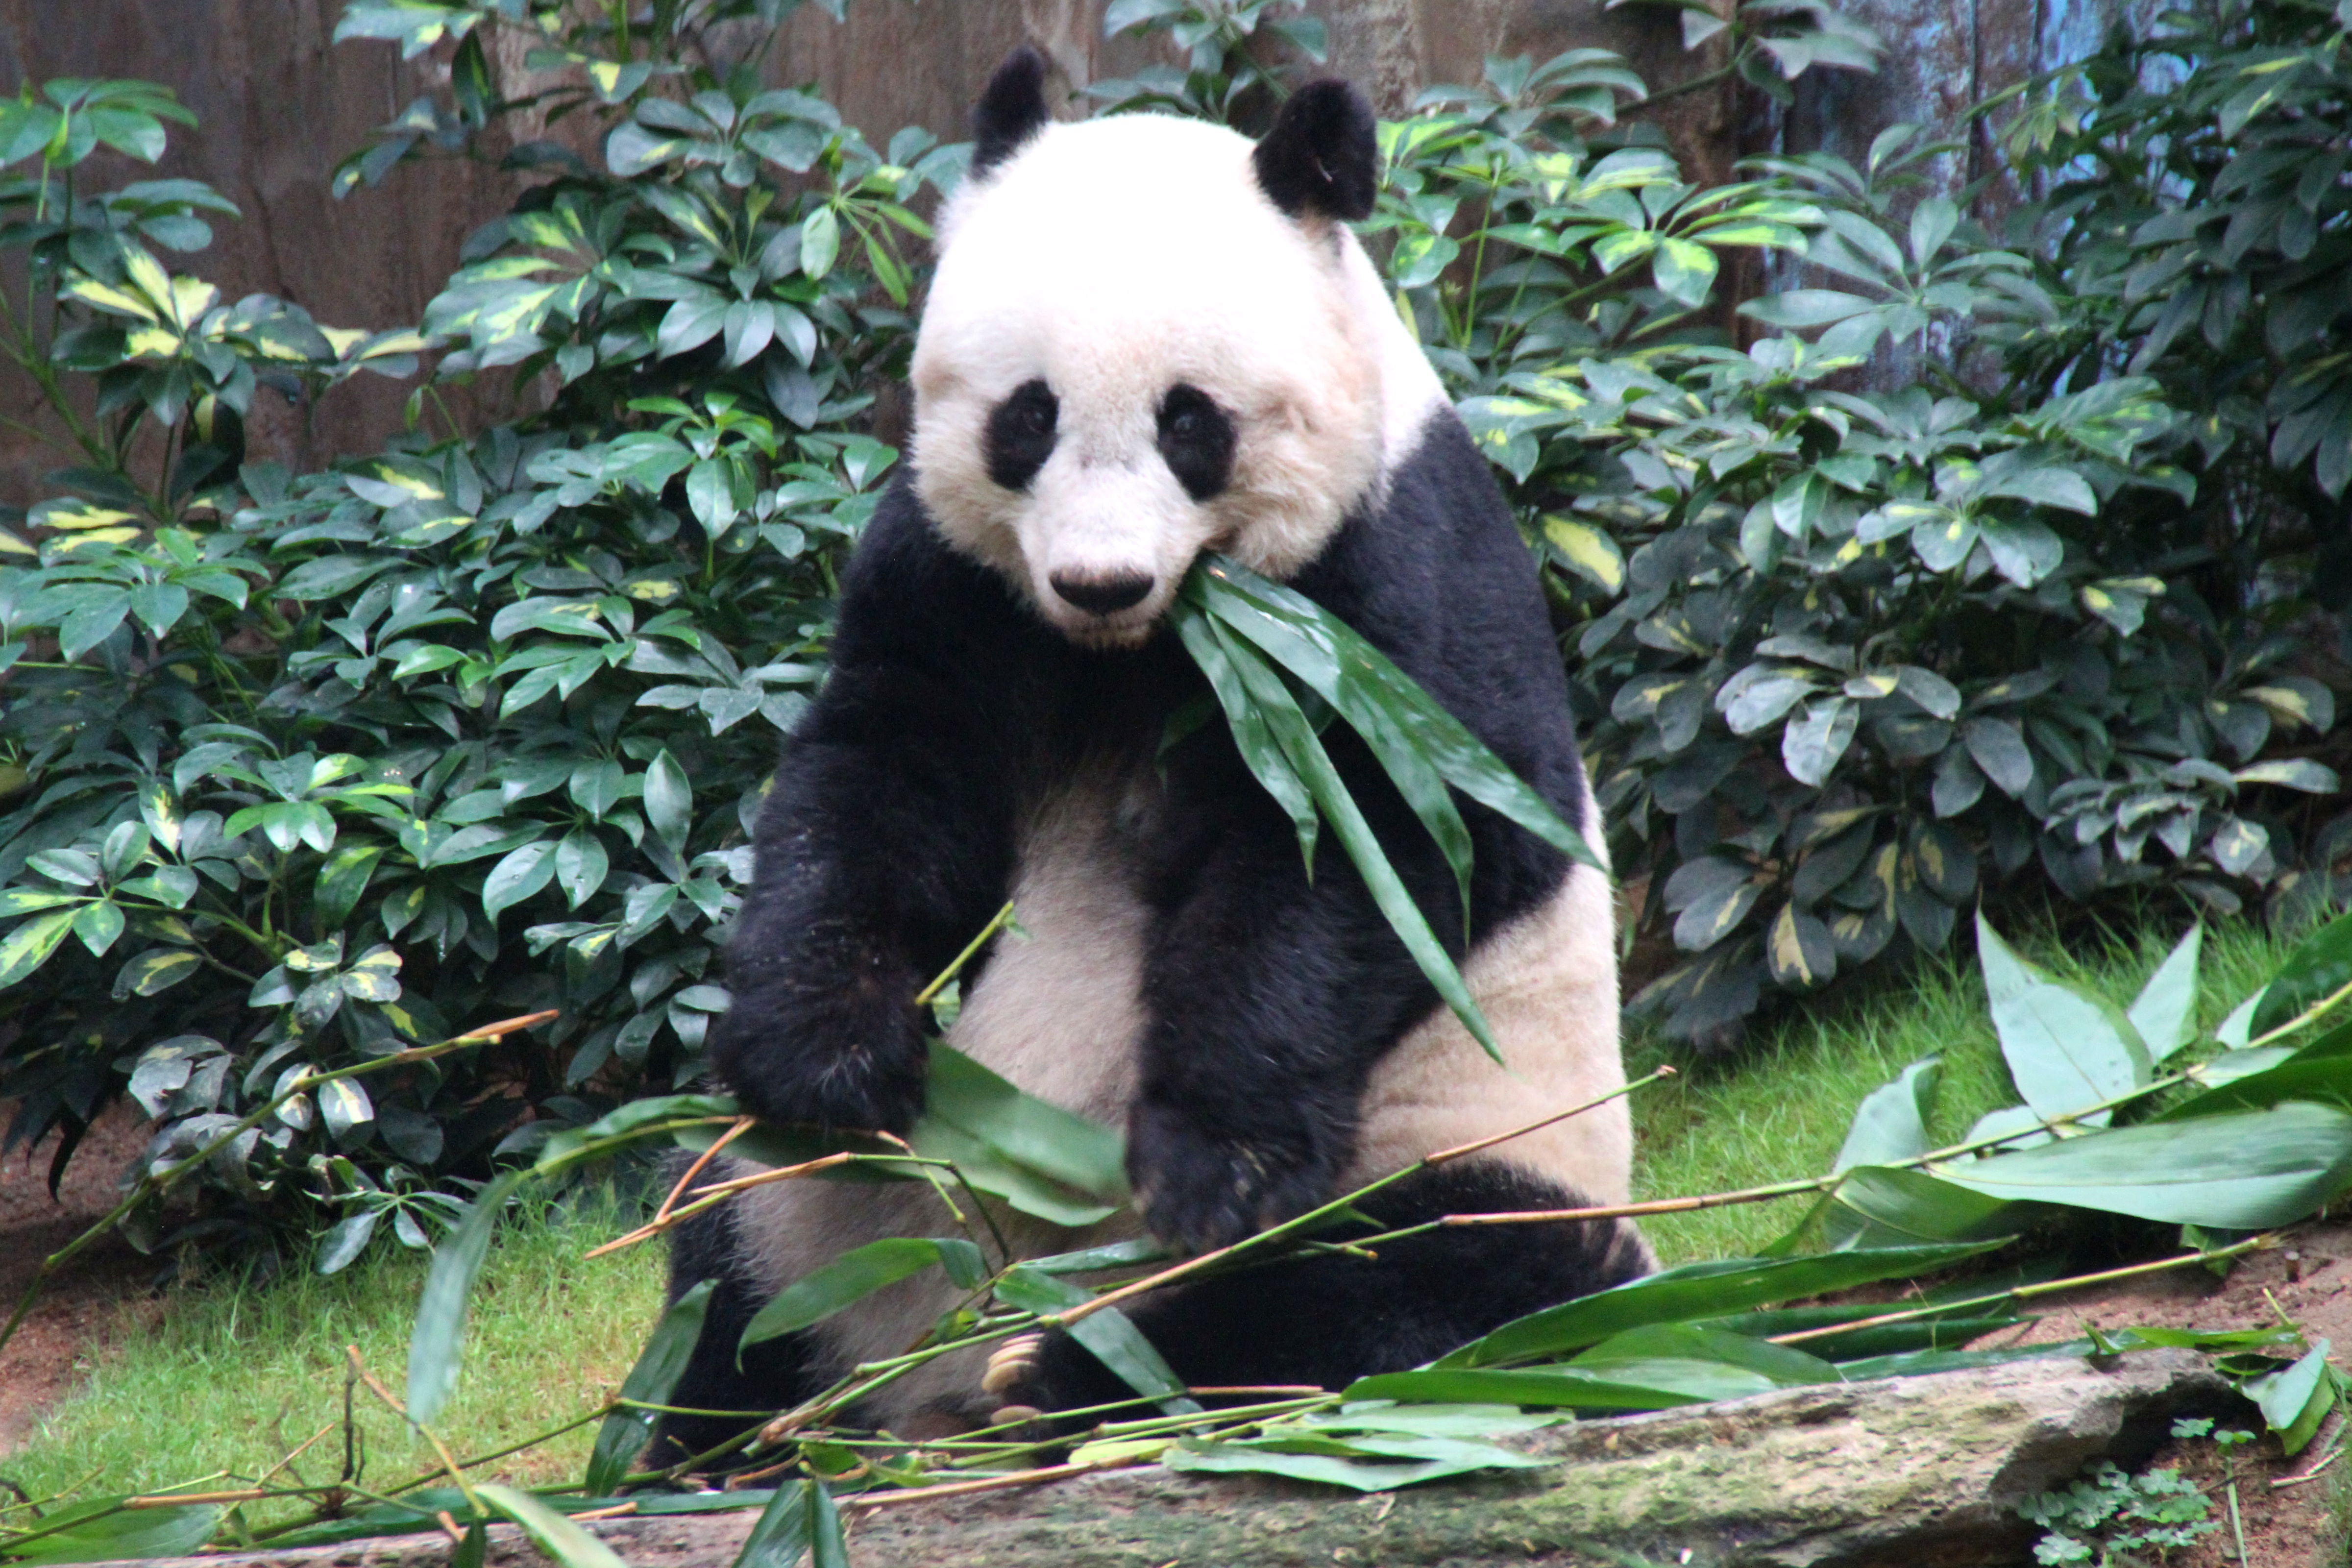 How old is Jia Jia the panda?